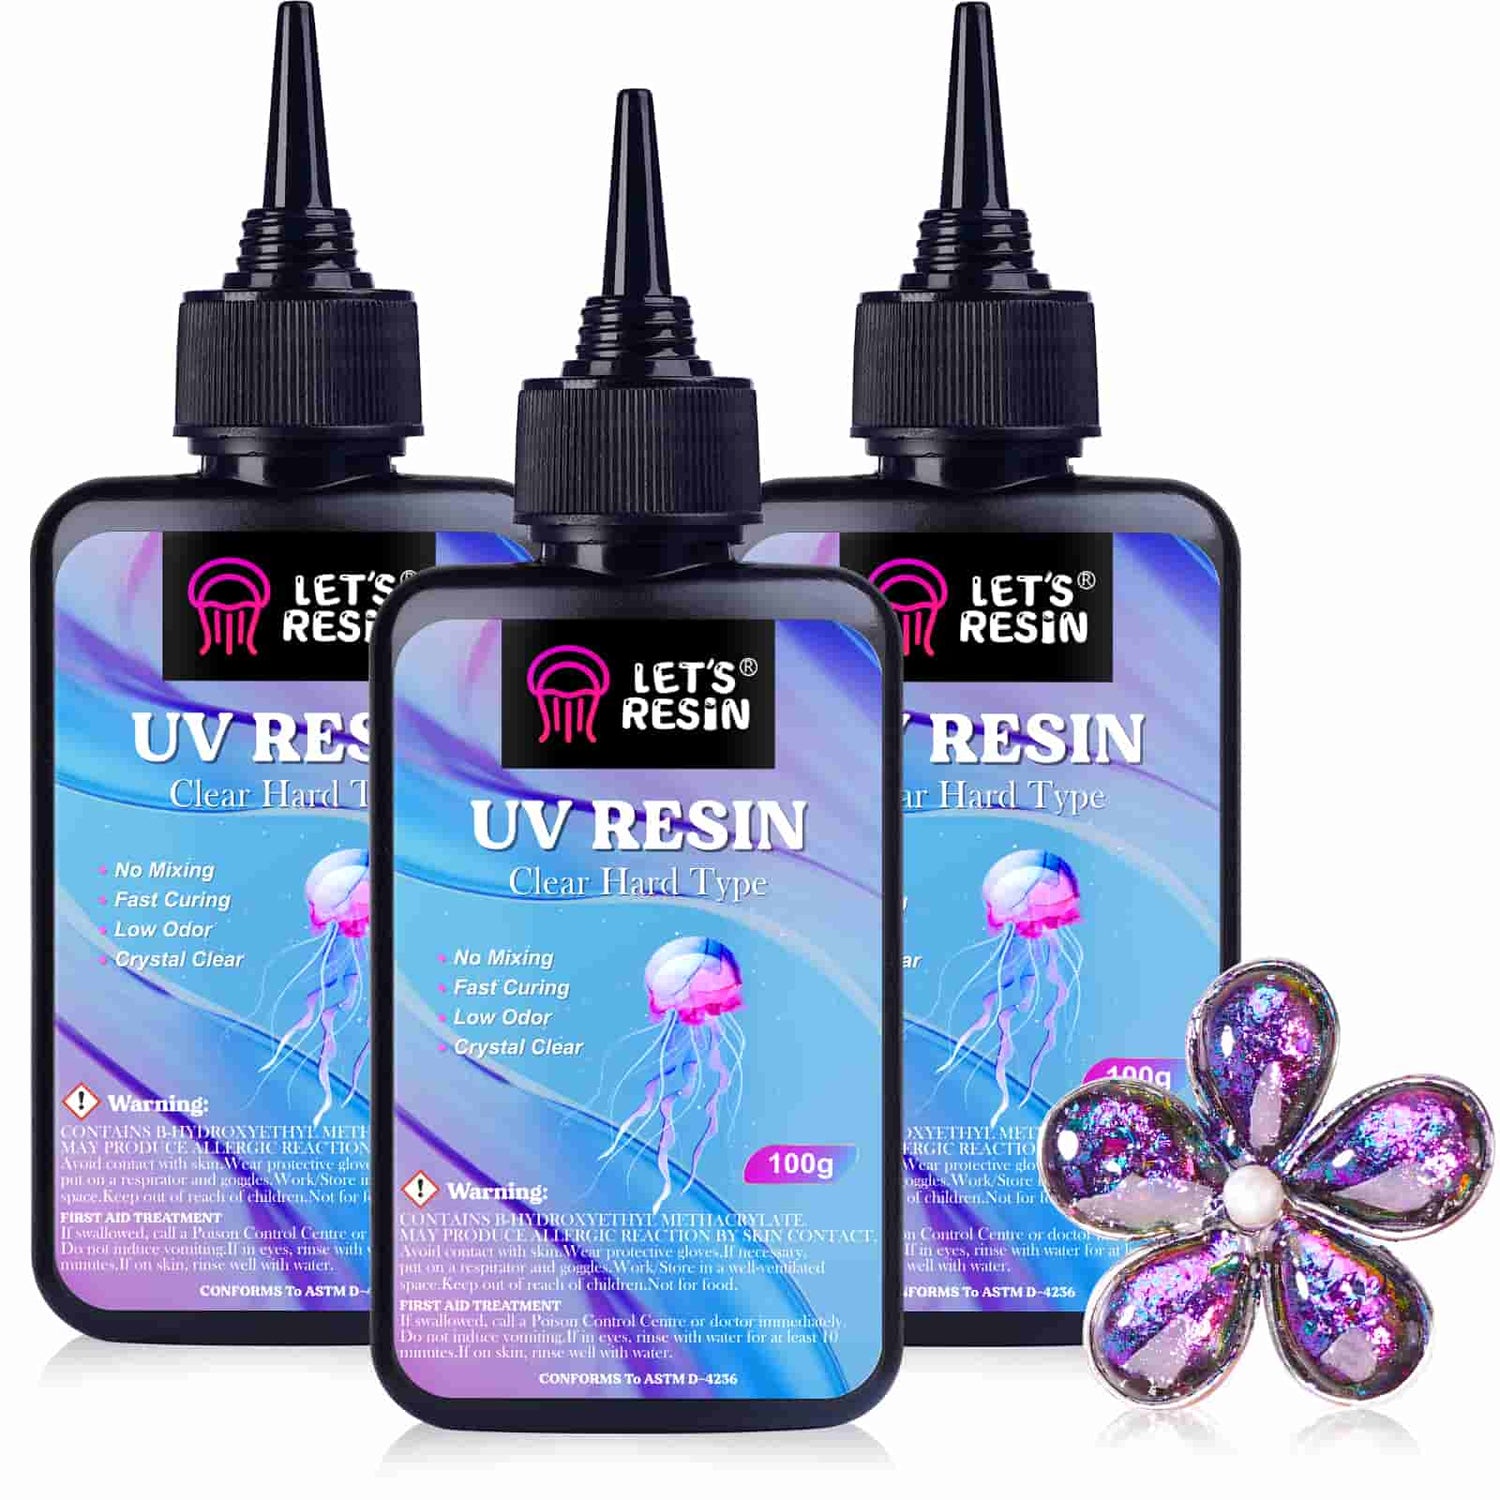  UV Resin, 2 PCS Upgrade Ultraviolet Epoxy Resin Crystal Clear  Hard Glue Solar Cure Sunlight Activated Resin for Handmade Jewelry, DIY  Craft Decoration, Casting and Coating(200g)